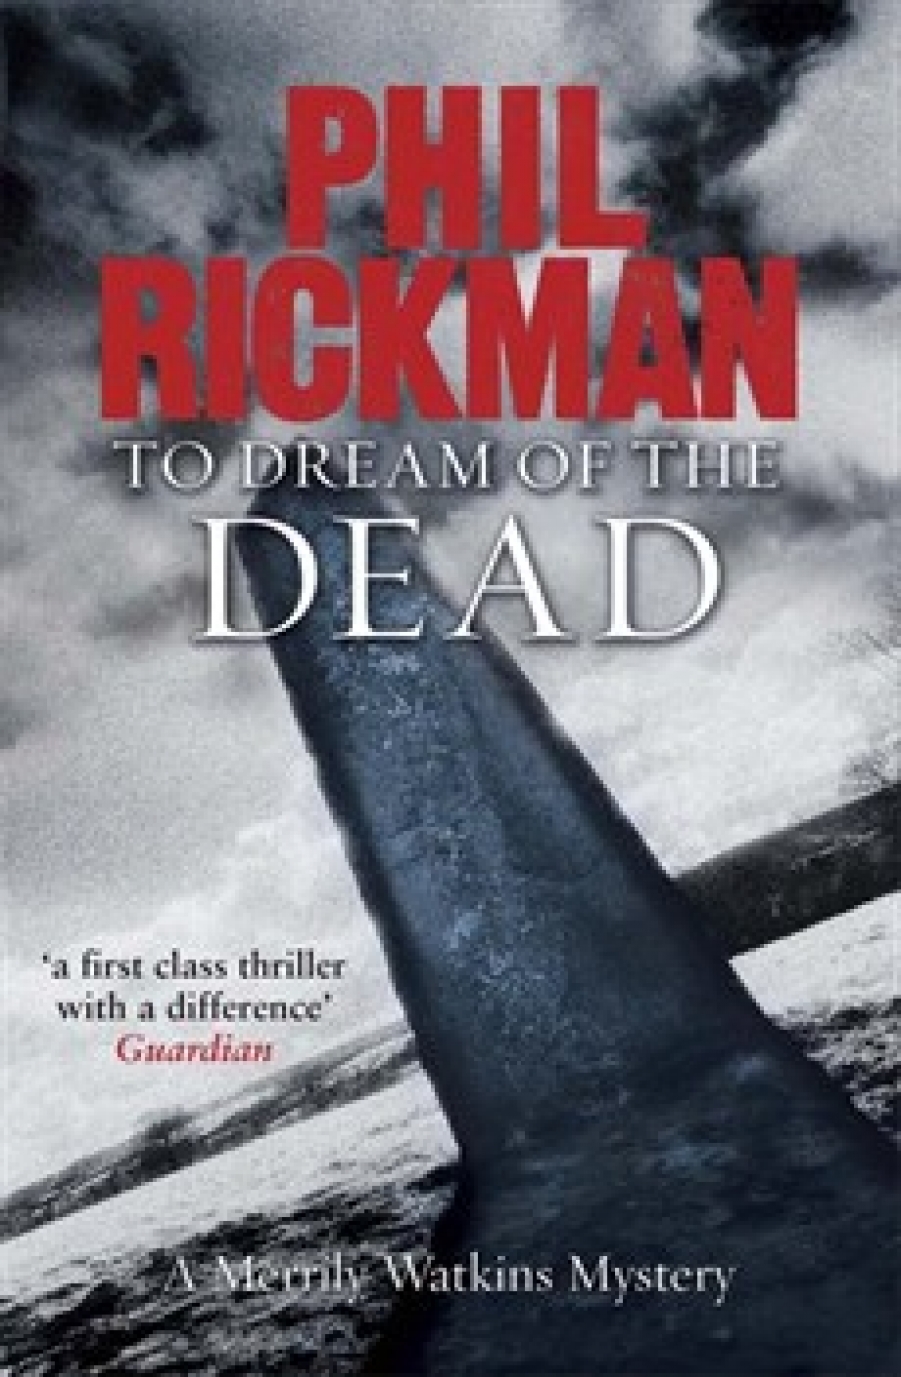 Rickman, Phil To Dream of the Dead (Merrily Watkins Mystery) 